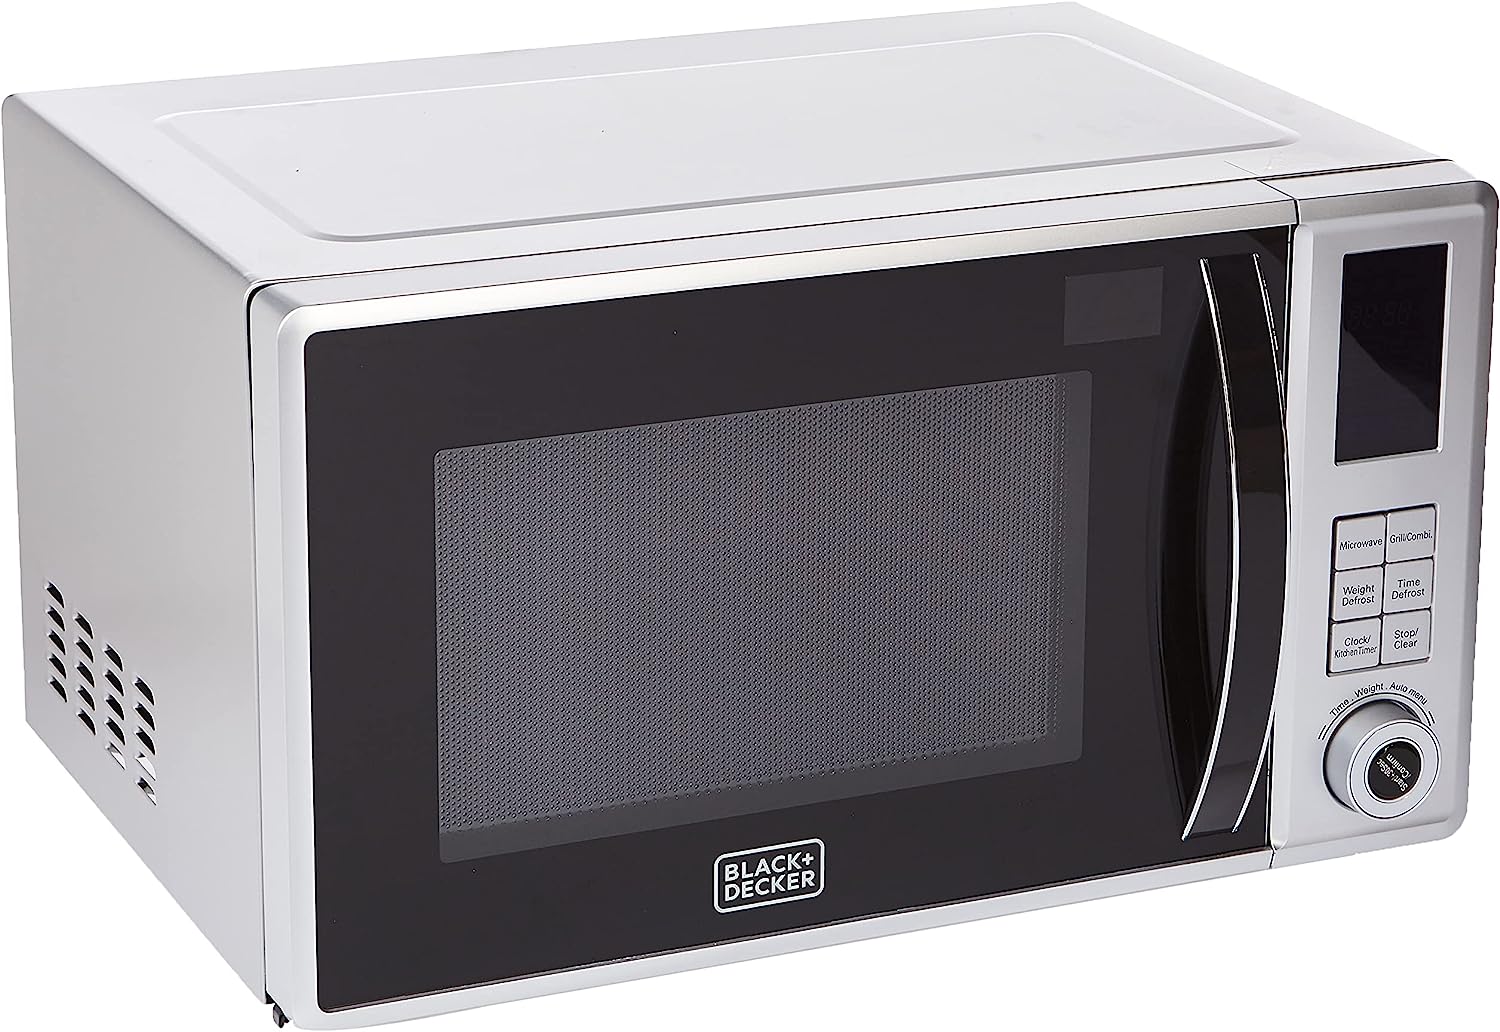 Black and Decker Microwave Oven With Grill | Capacity 23L | Power 800W | Color White | Best Kitchen Appliances in Bahrain | Halabh